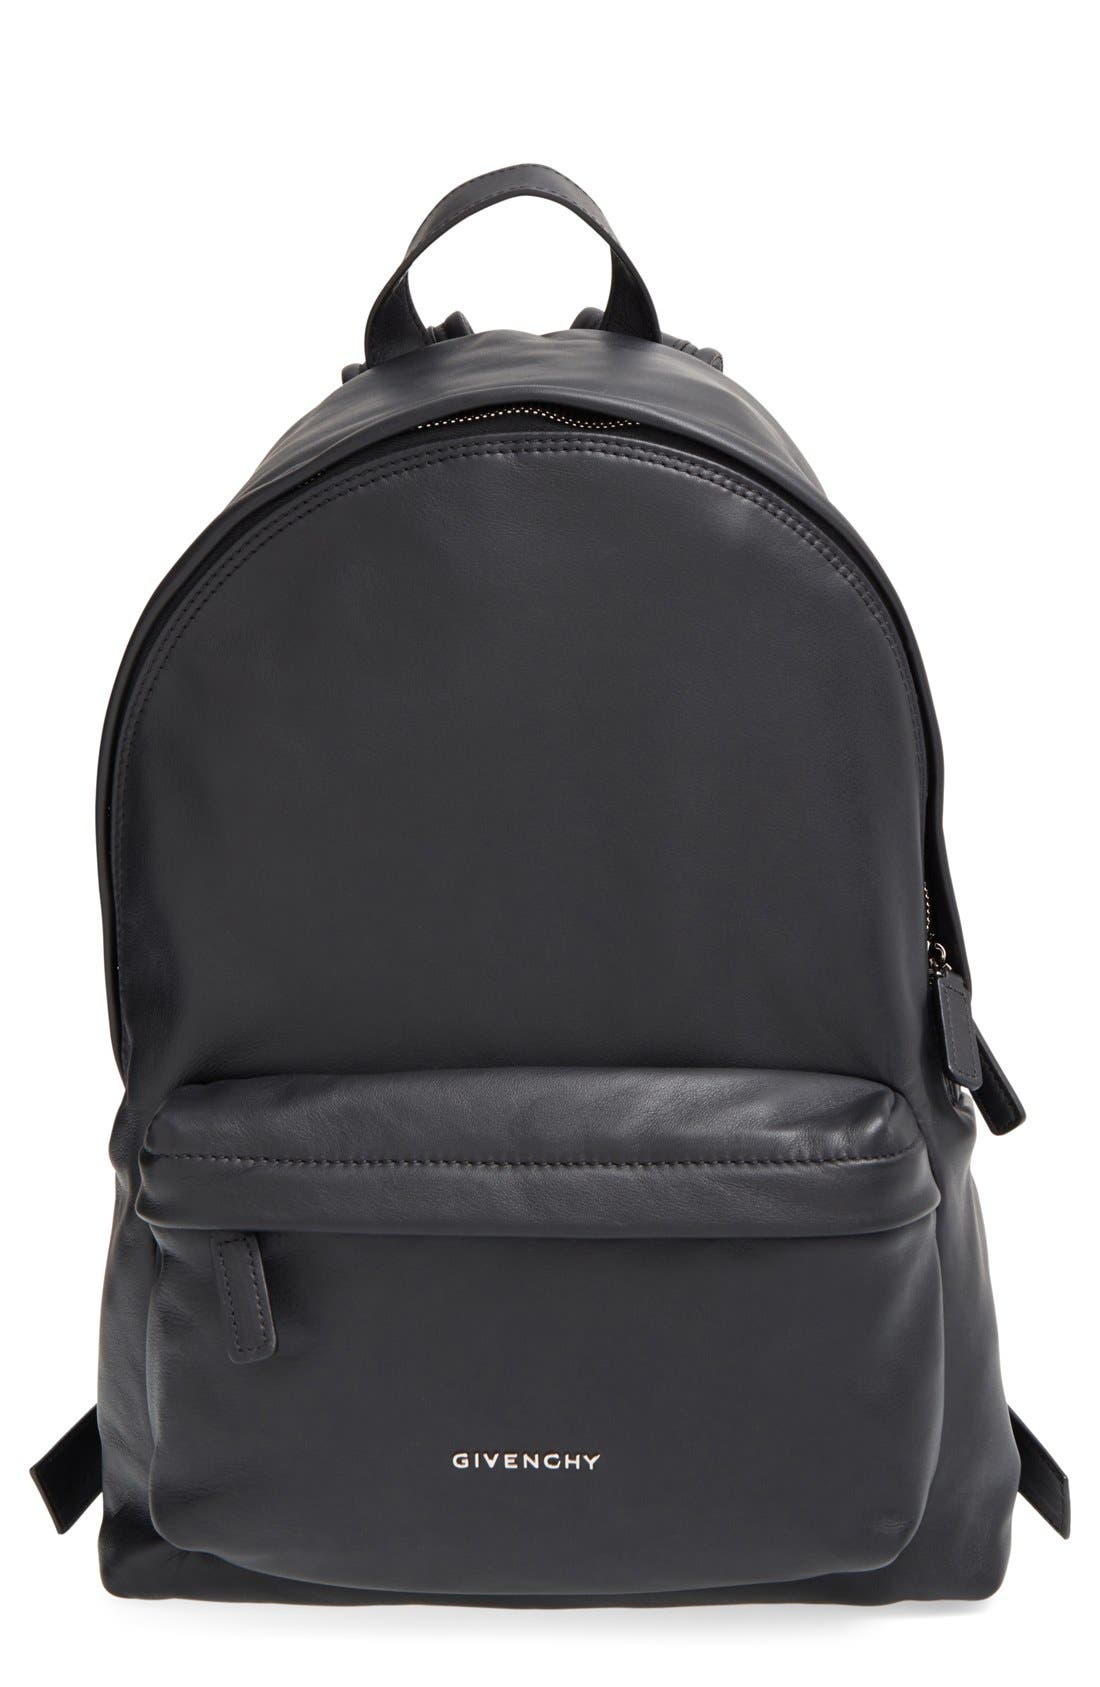 Givenchy Calfskin Leather Backpack 